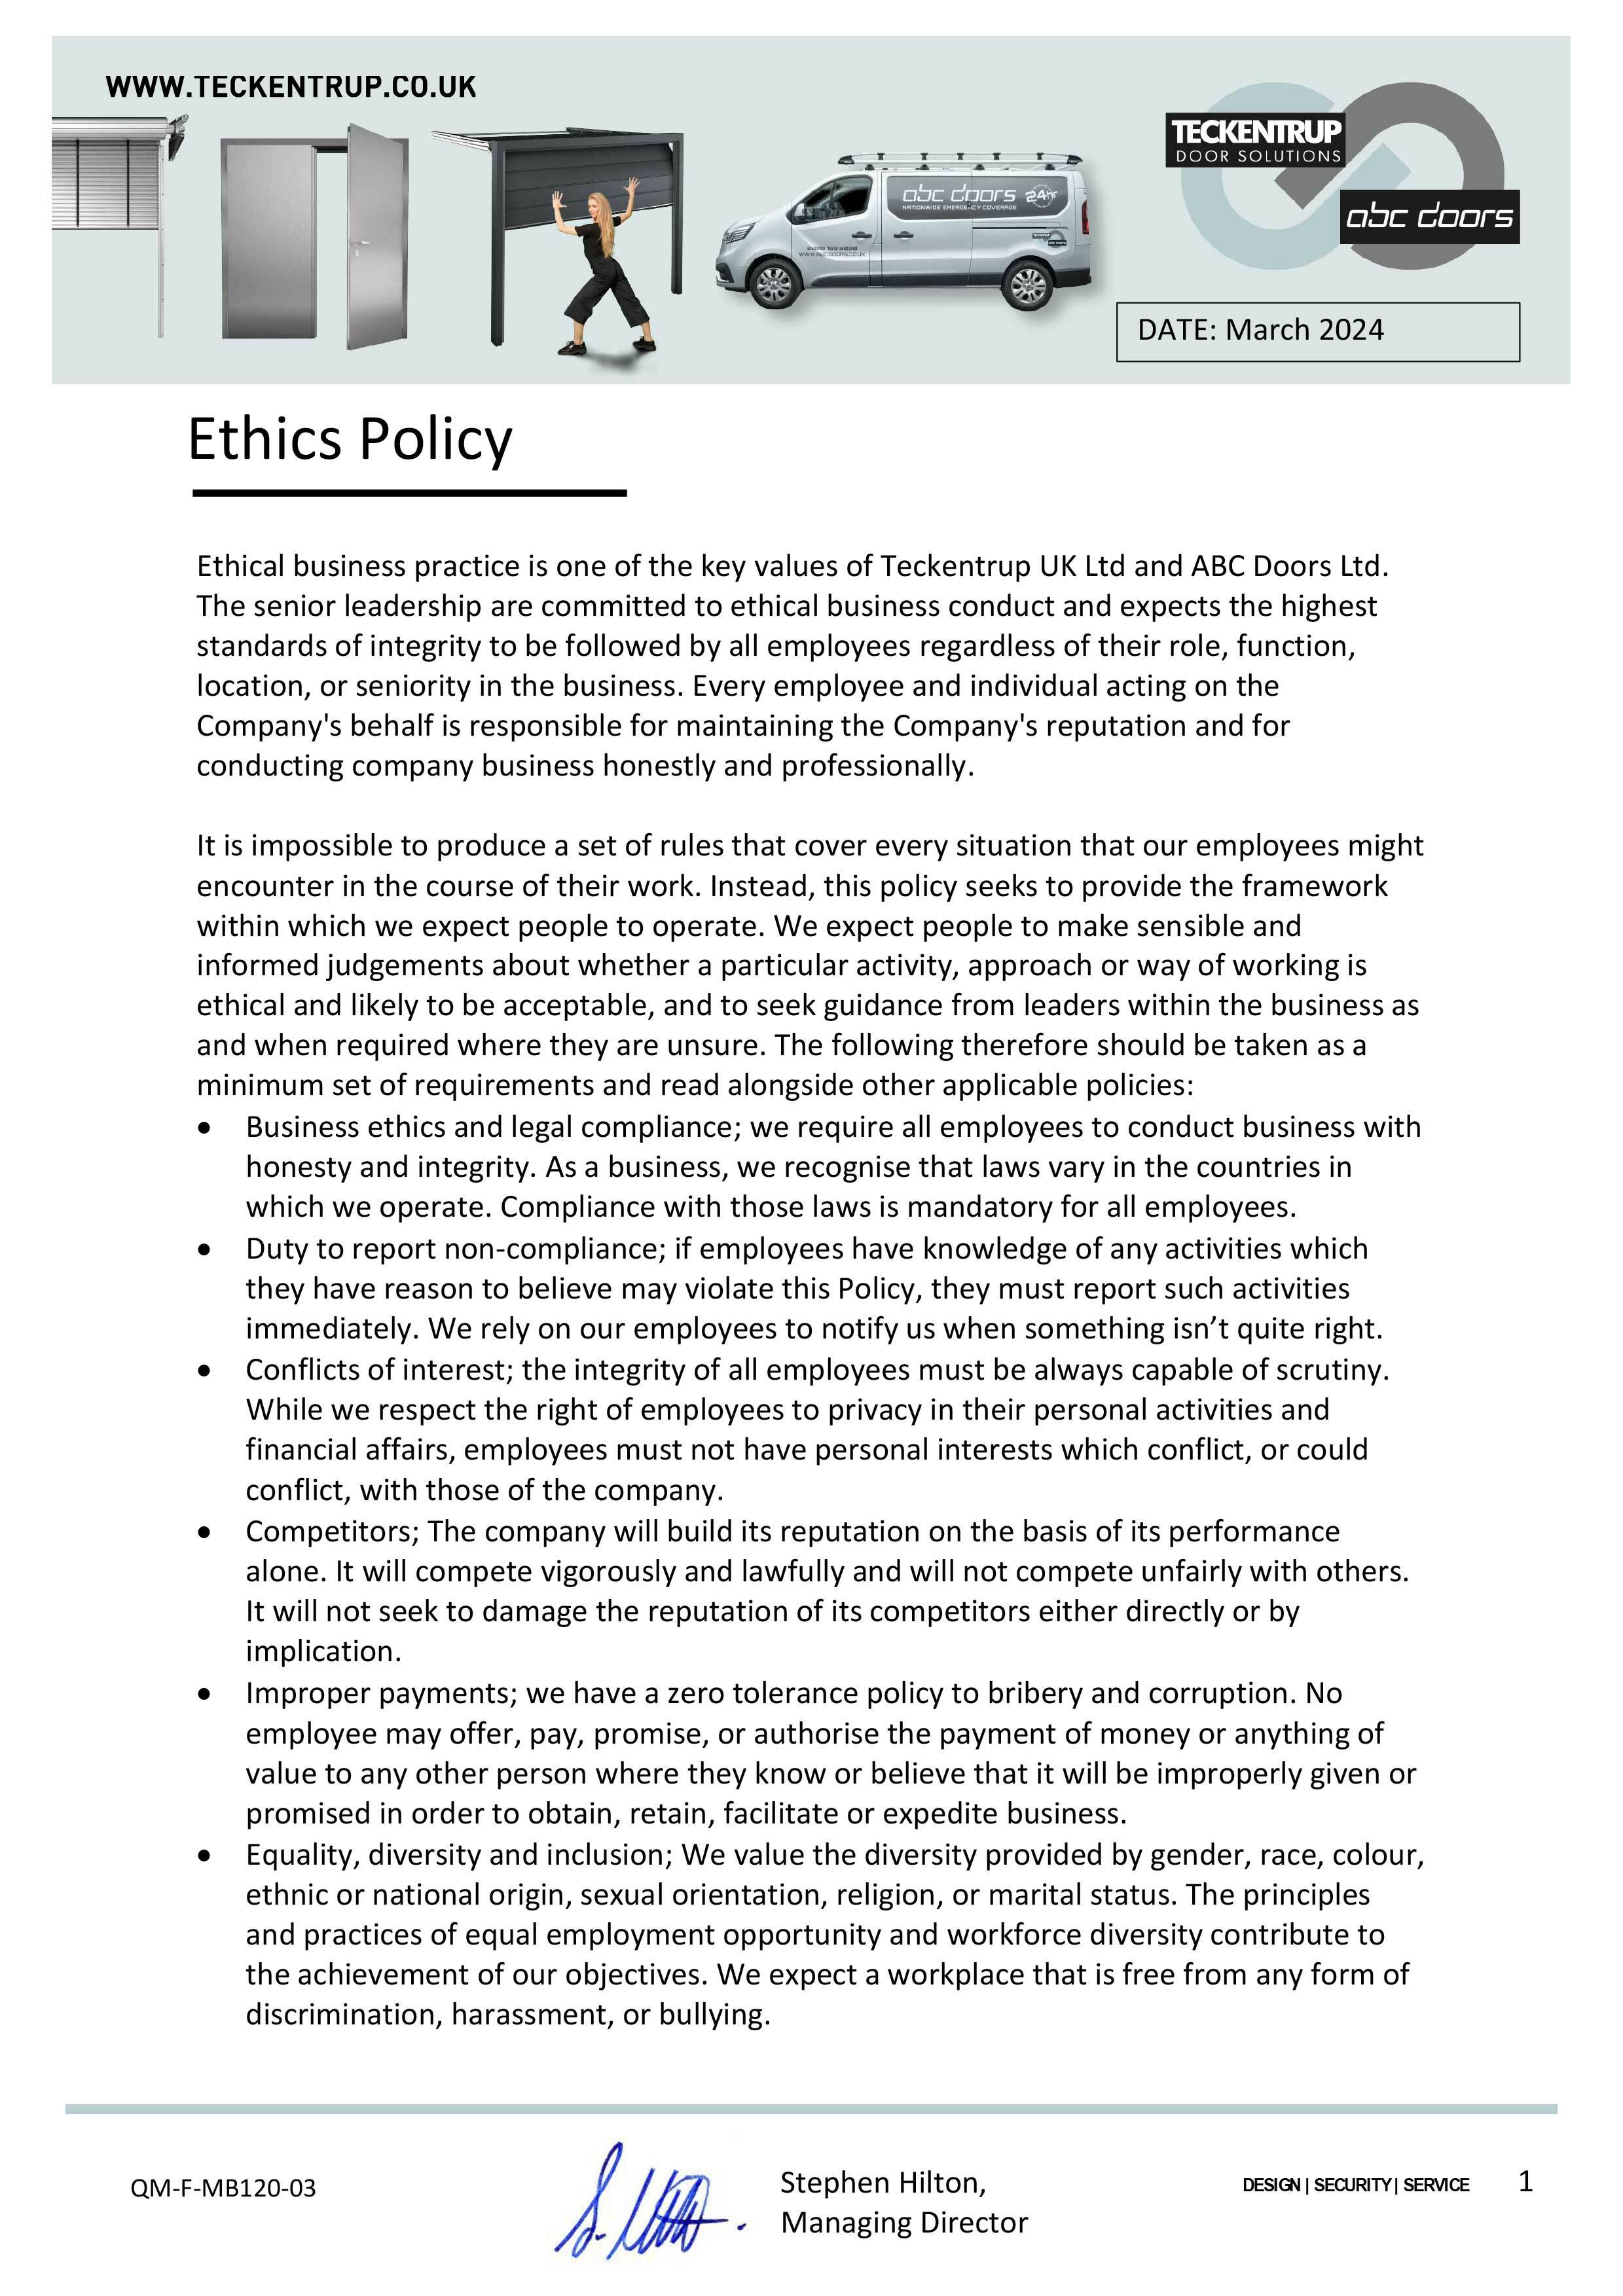 QM-F-MB120-03 Ethics Policy March 2024 cover